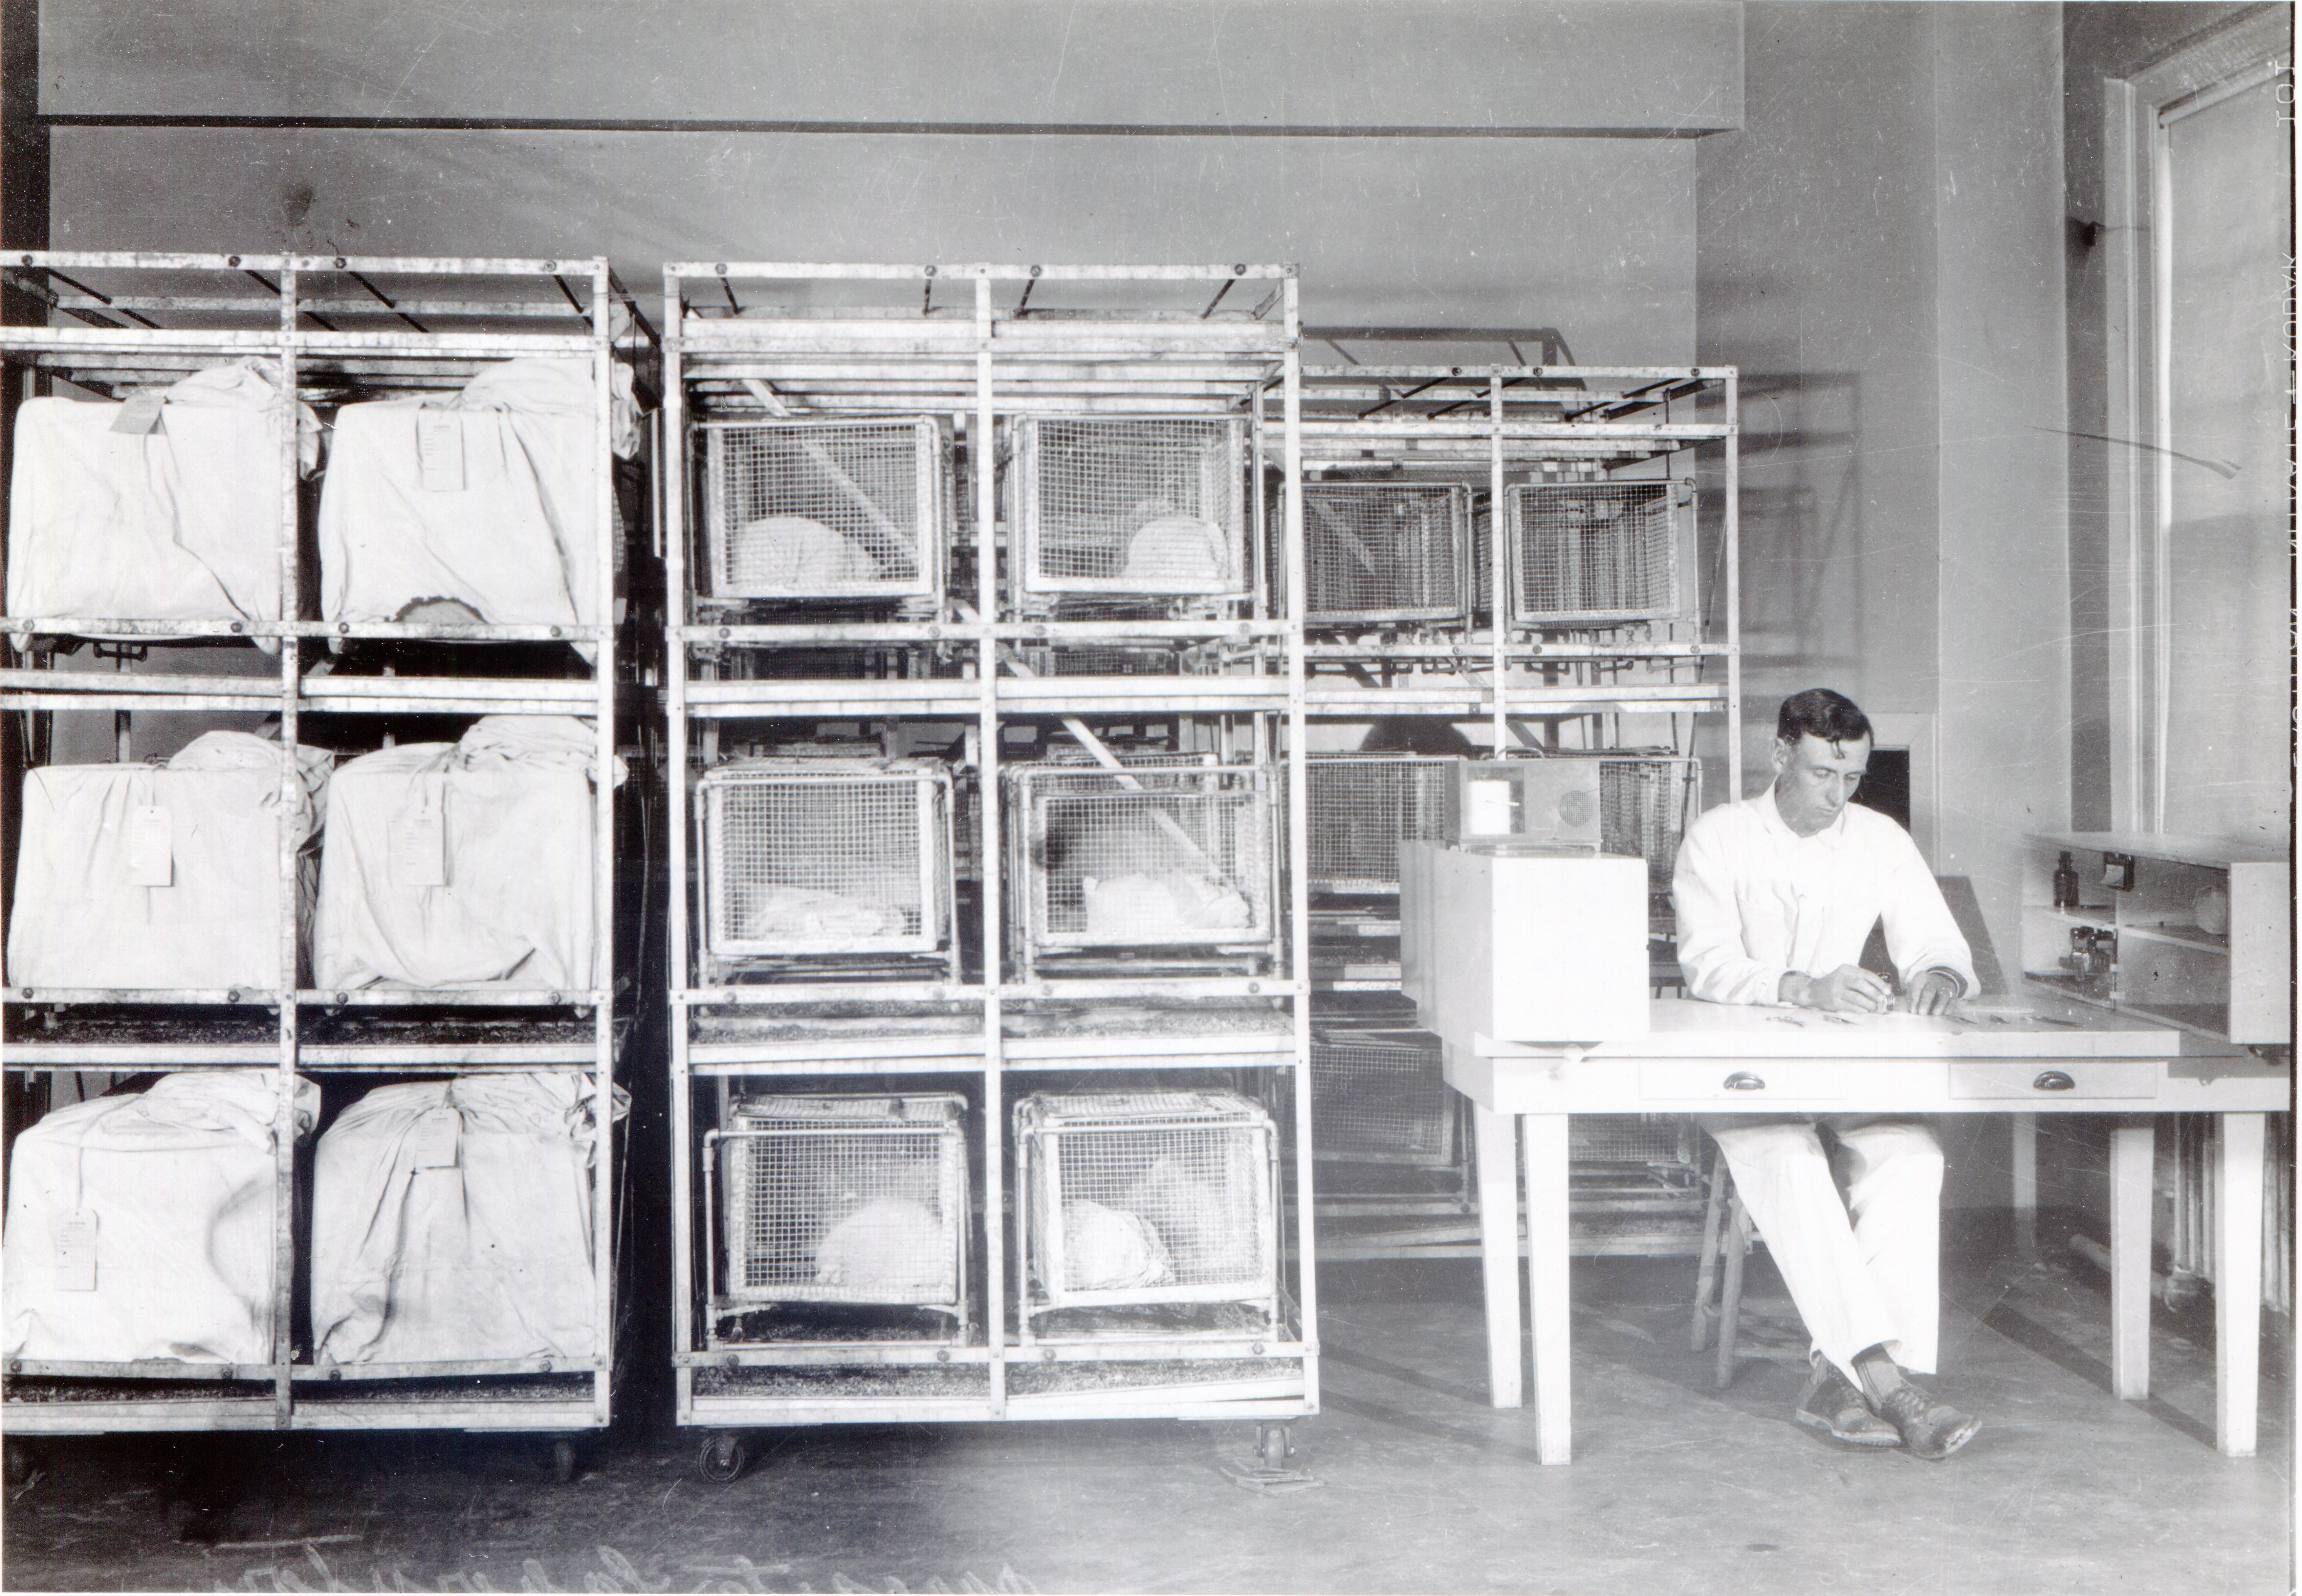 A man works at a desk in the animal area with a rack of cages covered in white cloth and a rack of uncovered cages.